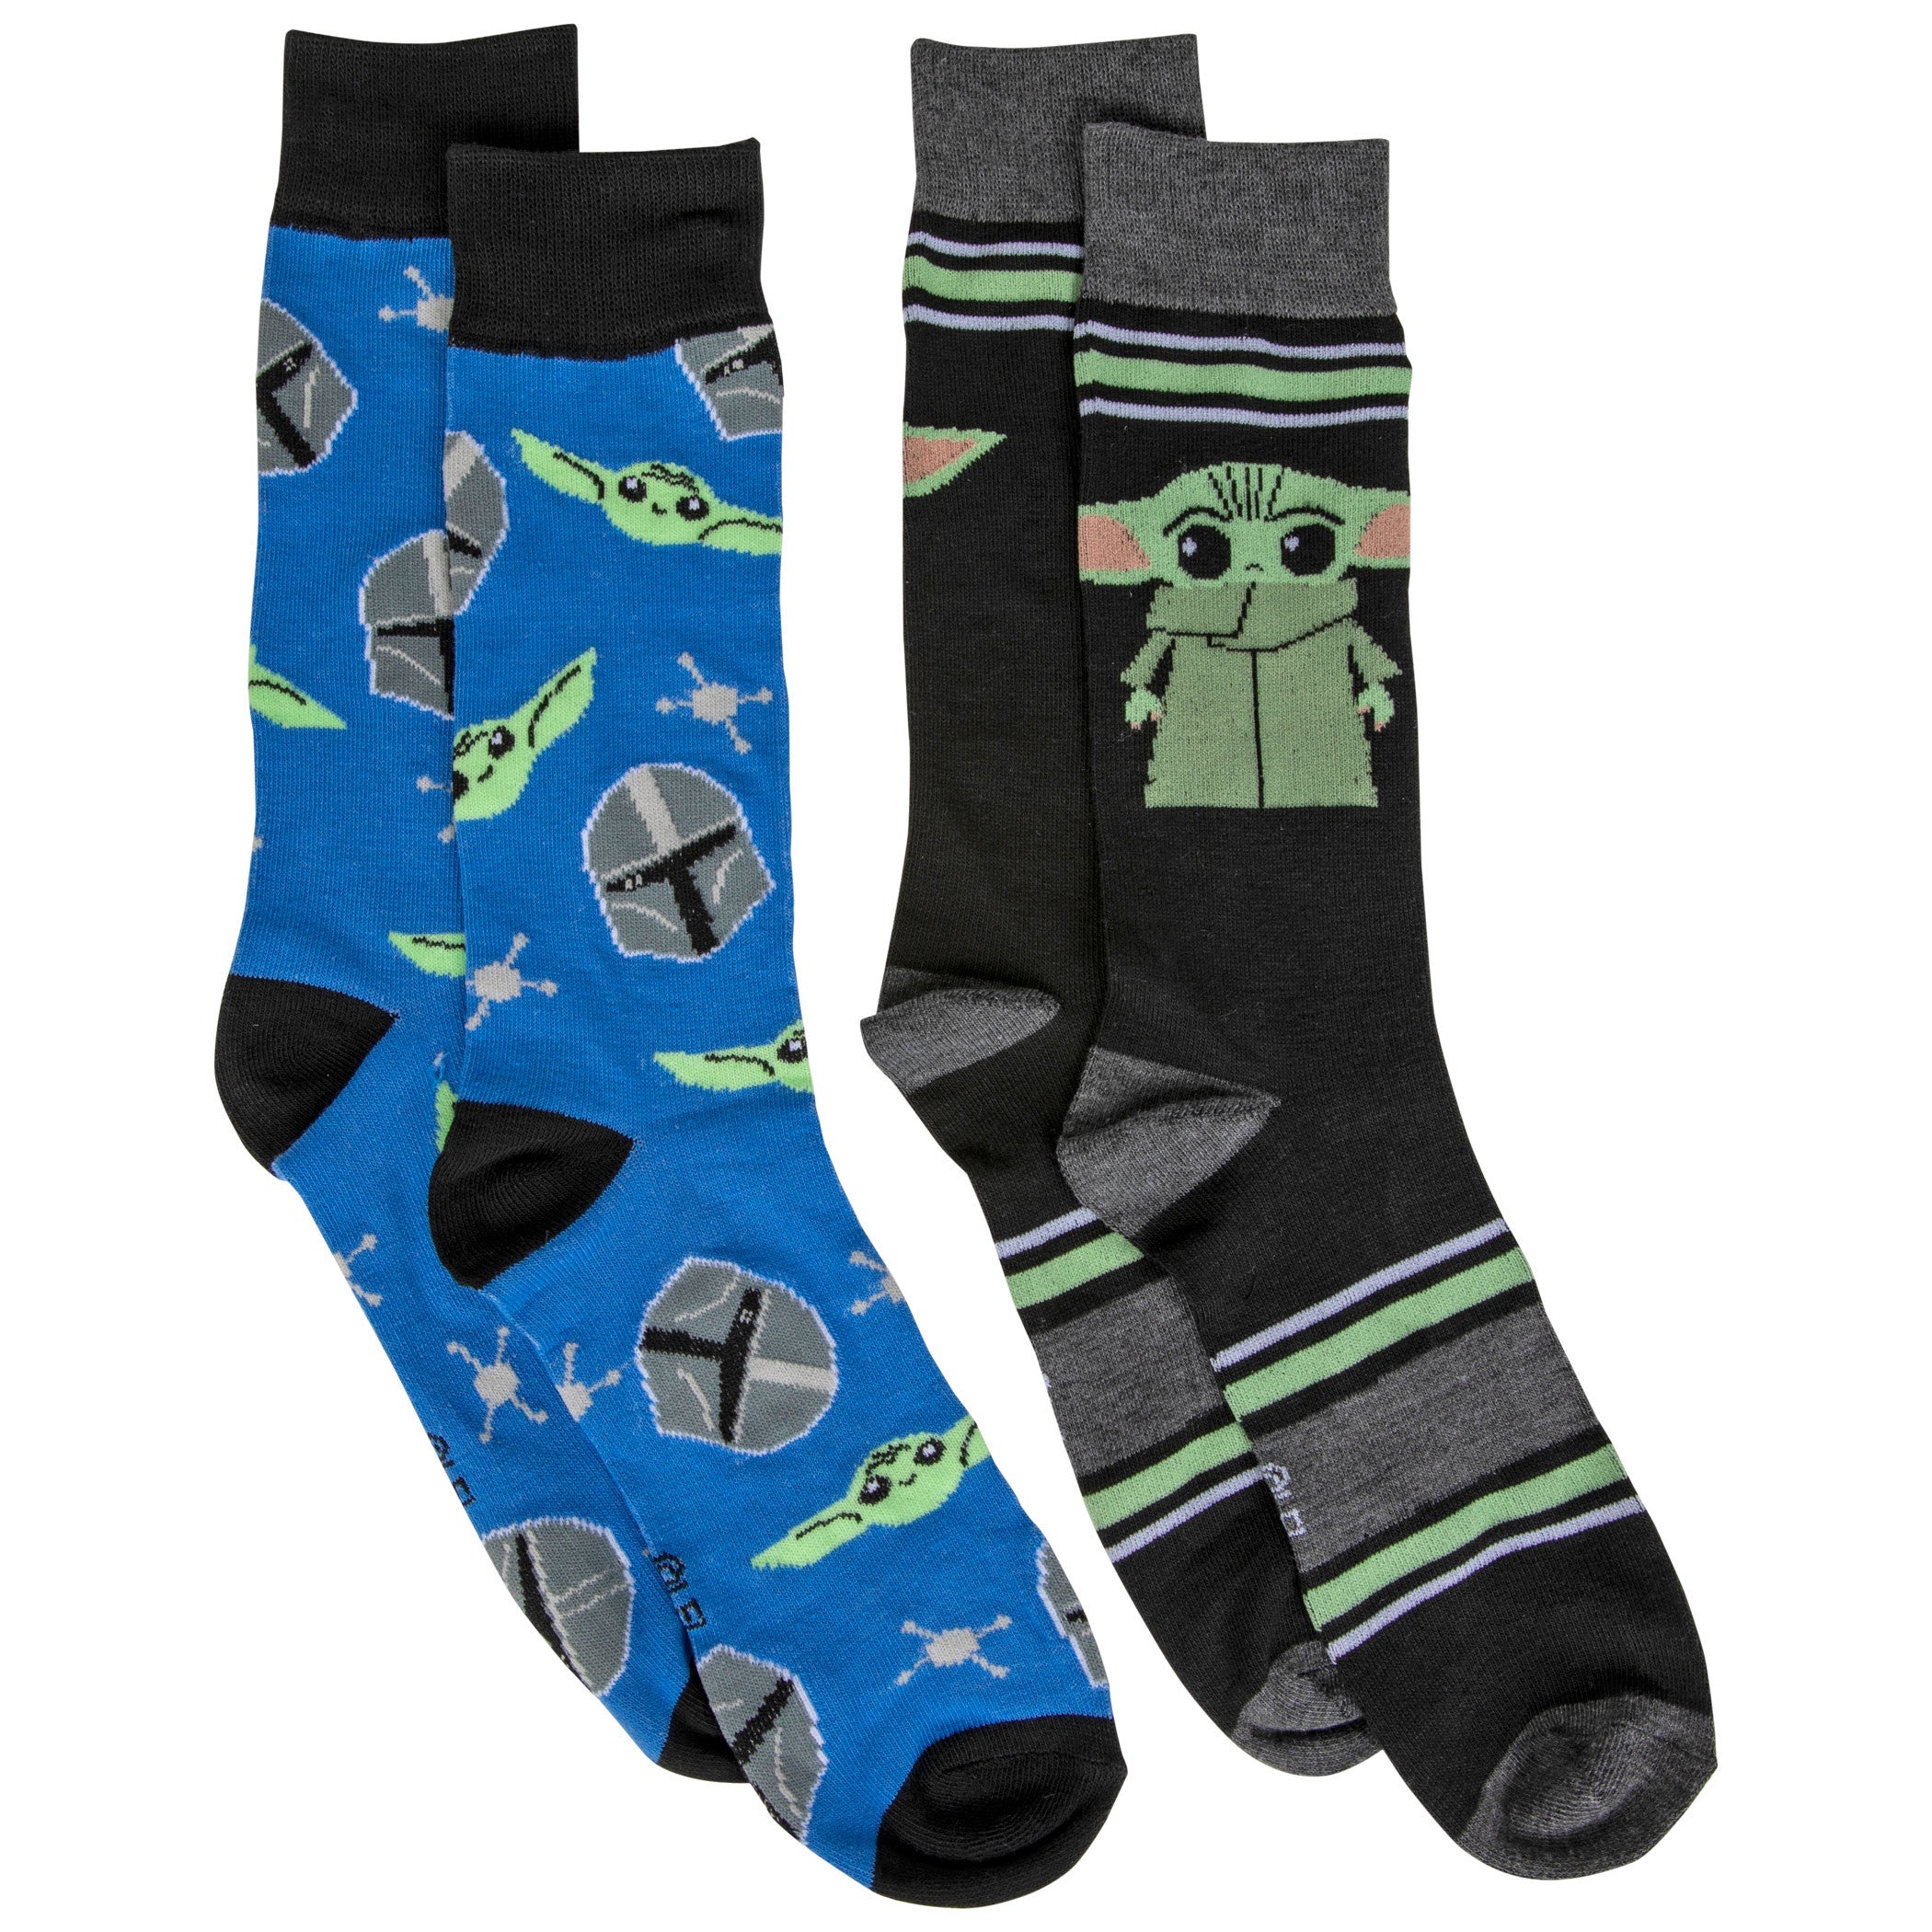 Star Wars The Mandalorian The Child & The Way 2-Pack of Casual Crew Socks